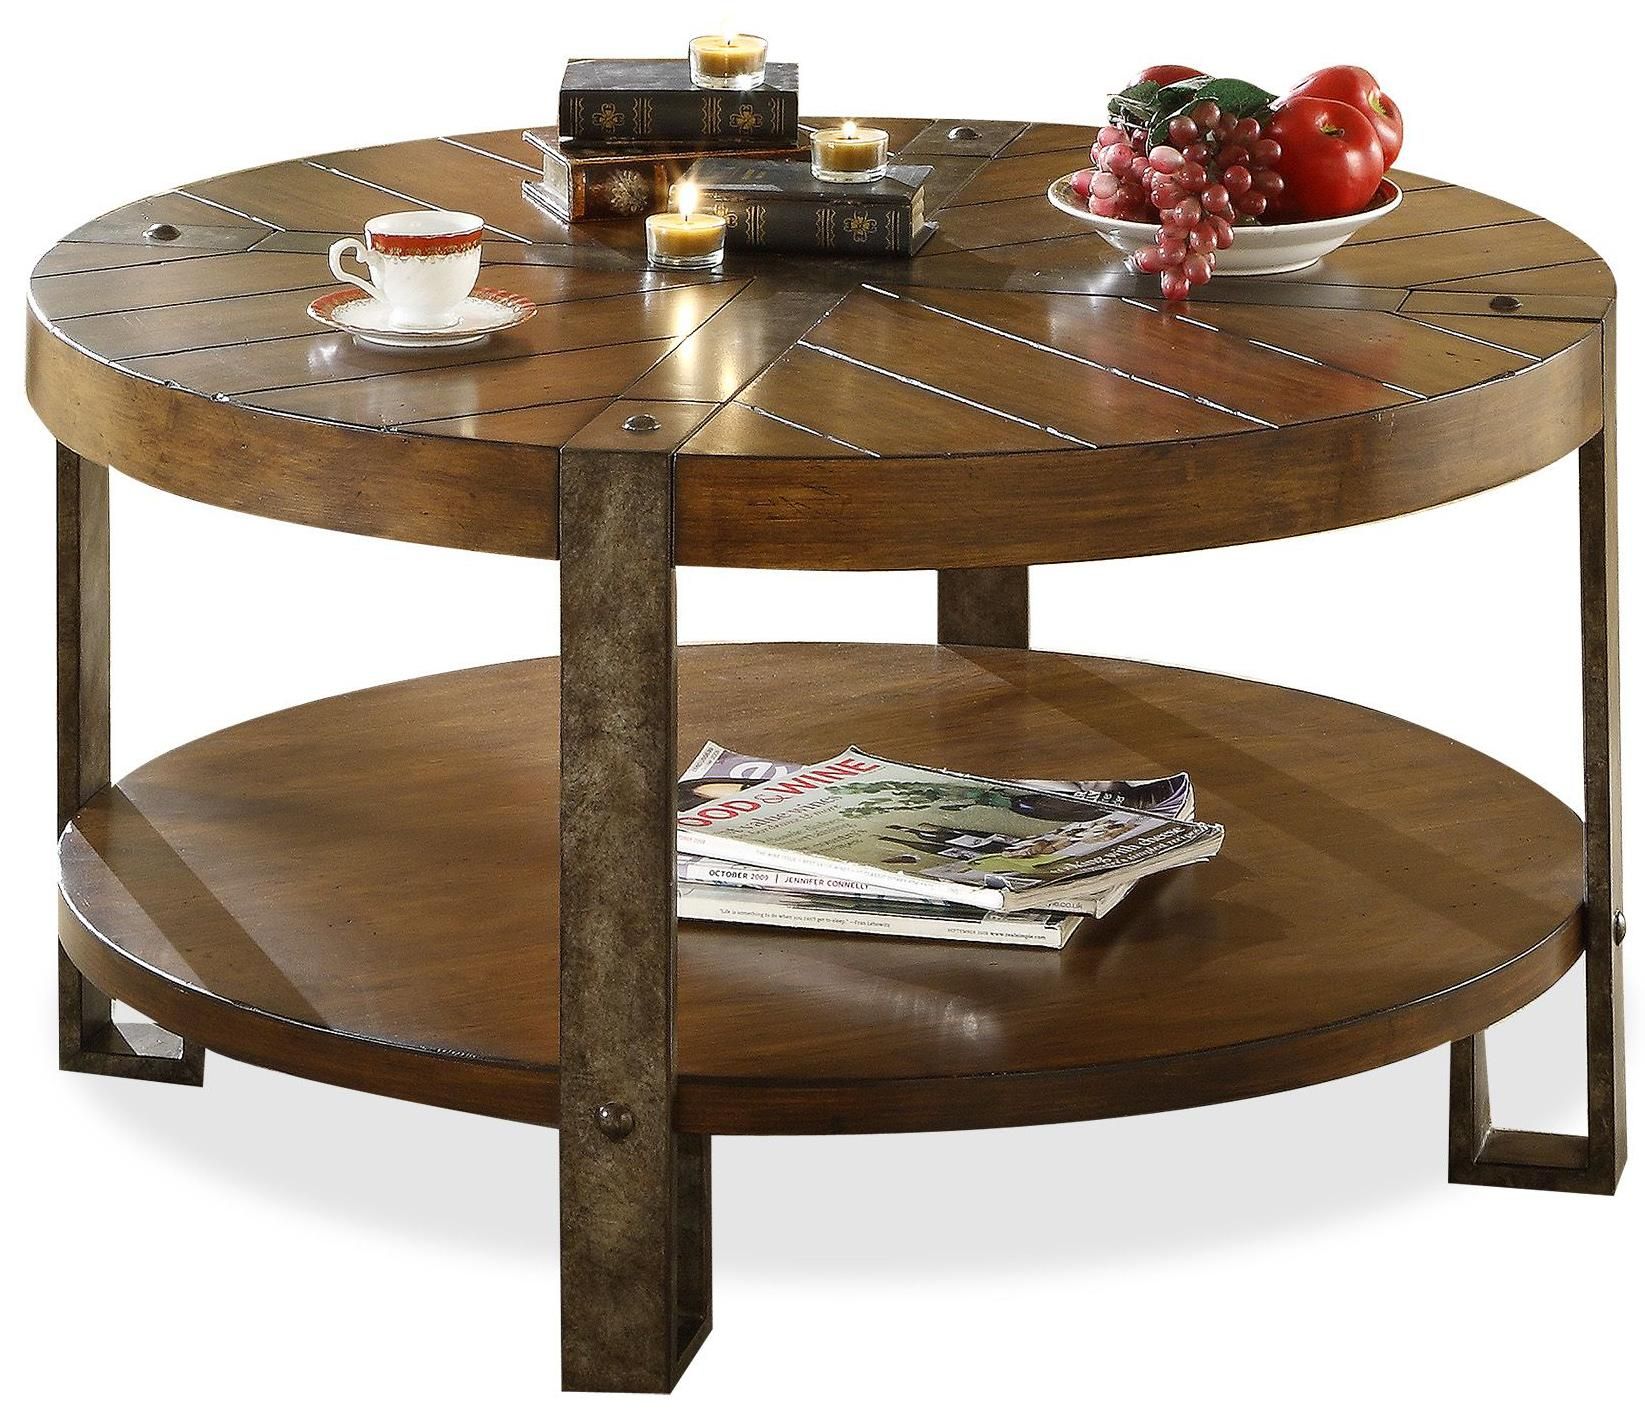 Round Coffee Tables With Storage – Homesfeed Regarding Round Coffee Tables With Storage (Gallery 8 of 20)